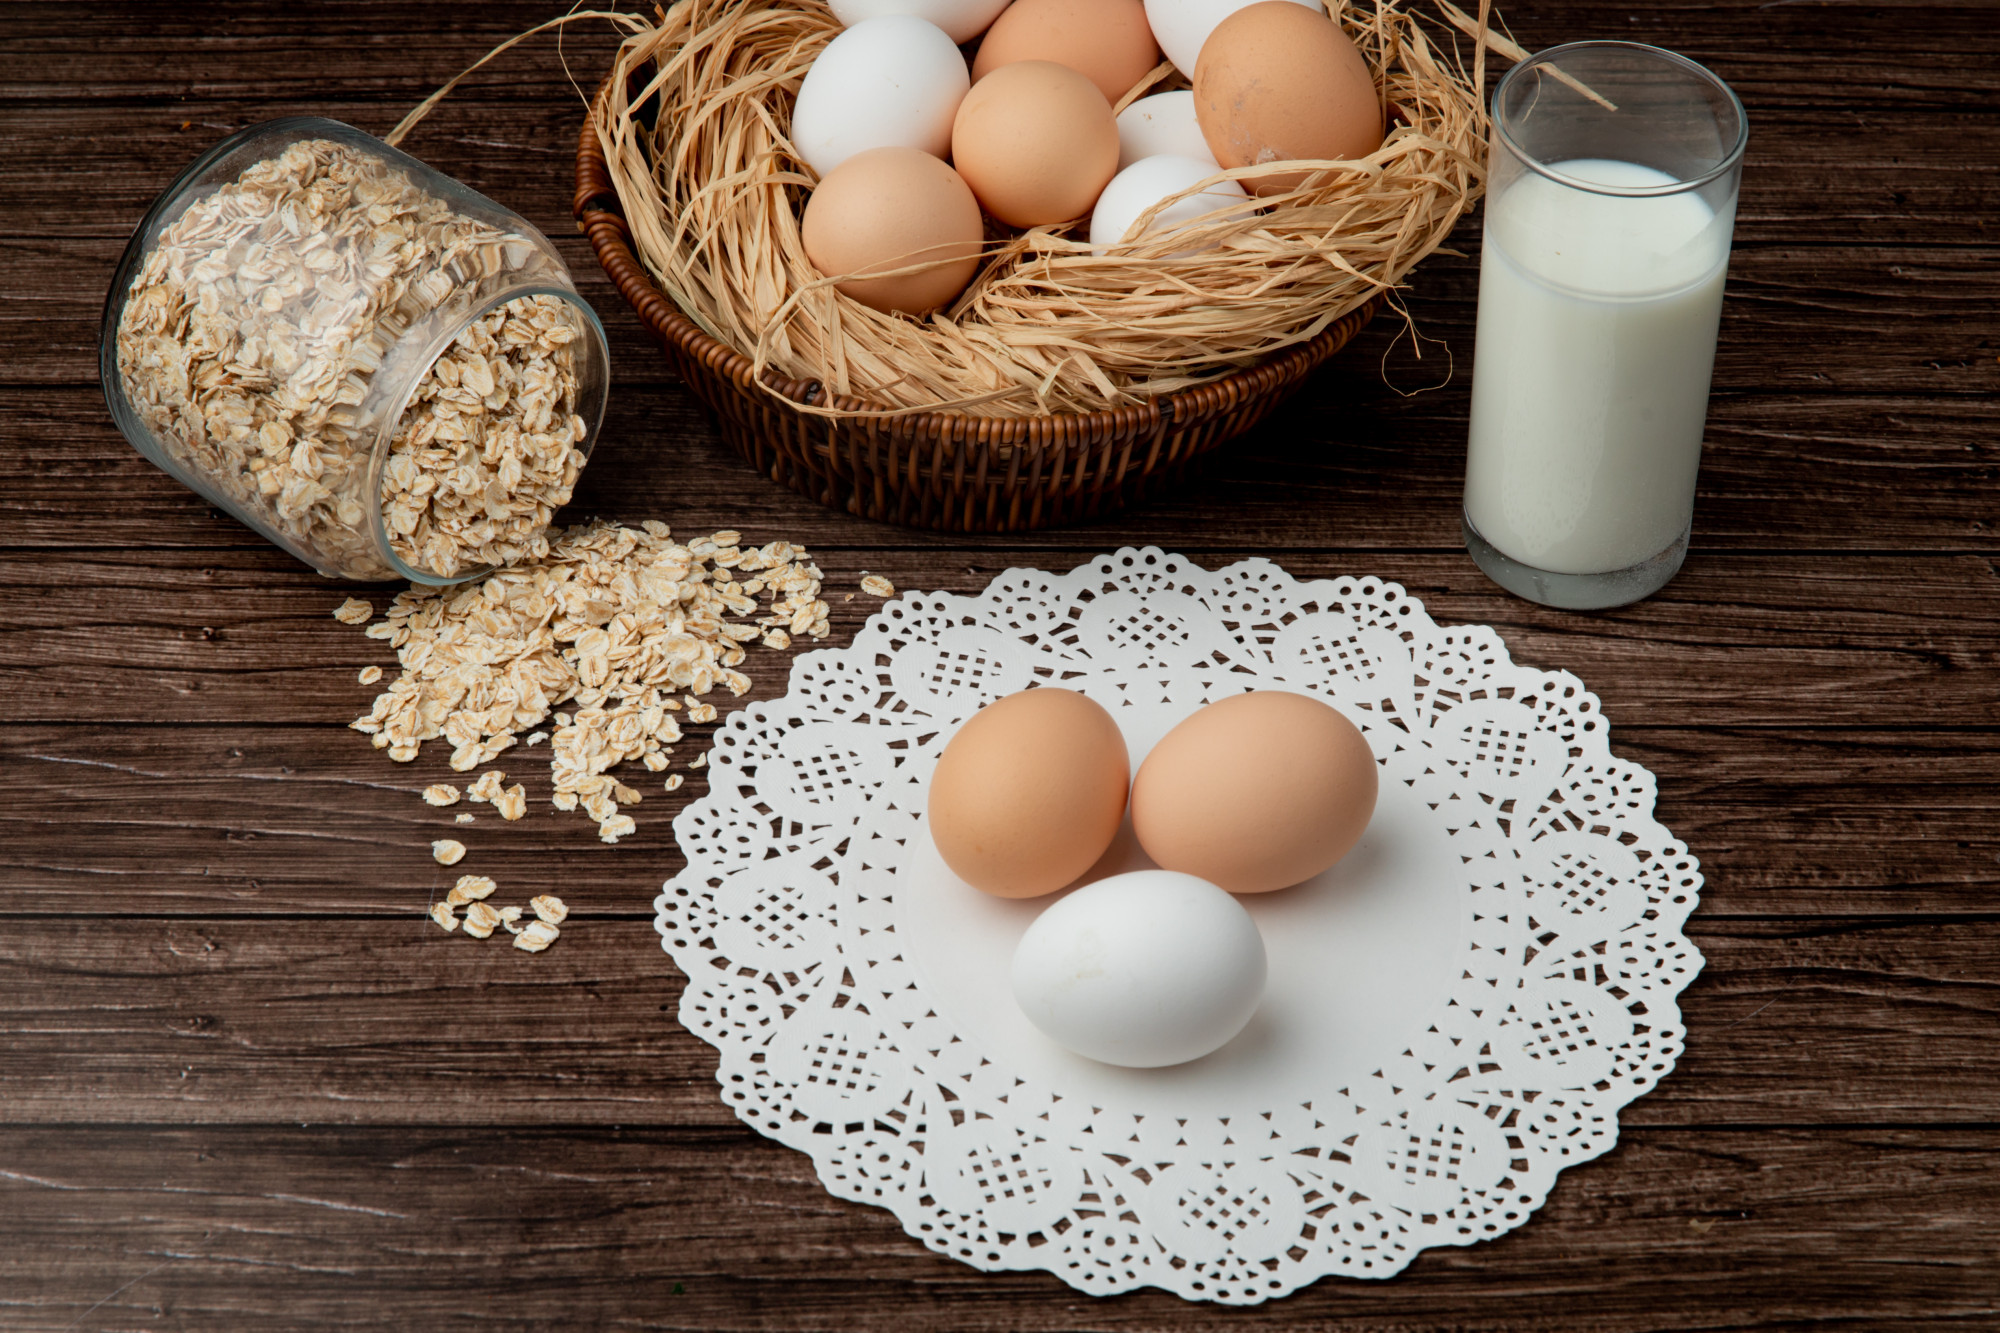 Side view of eggs on paper doily with oat flakes spilling out of jar and milk on wooden background